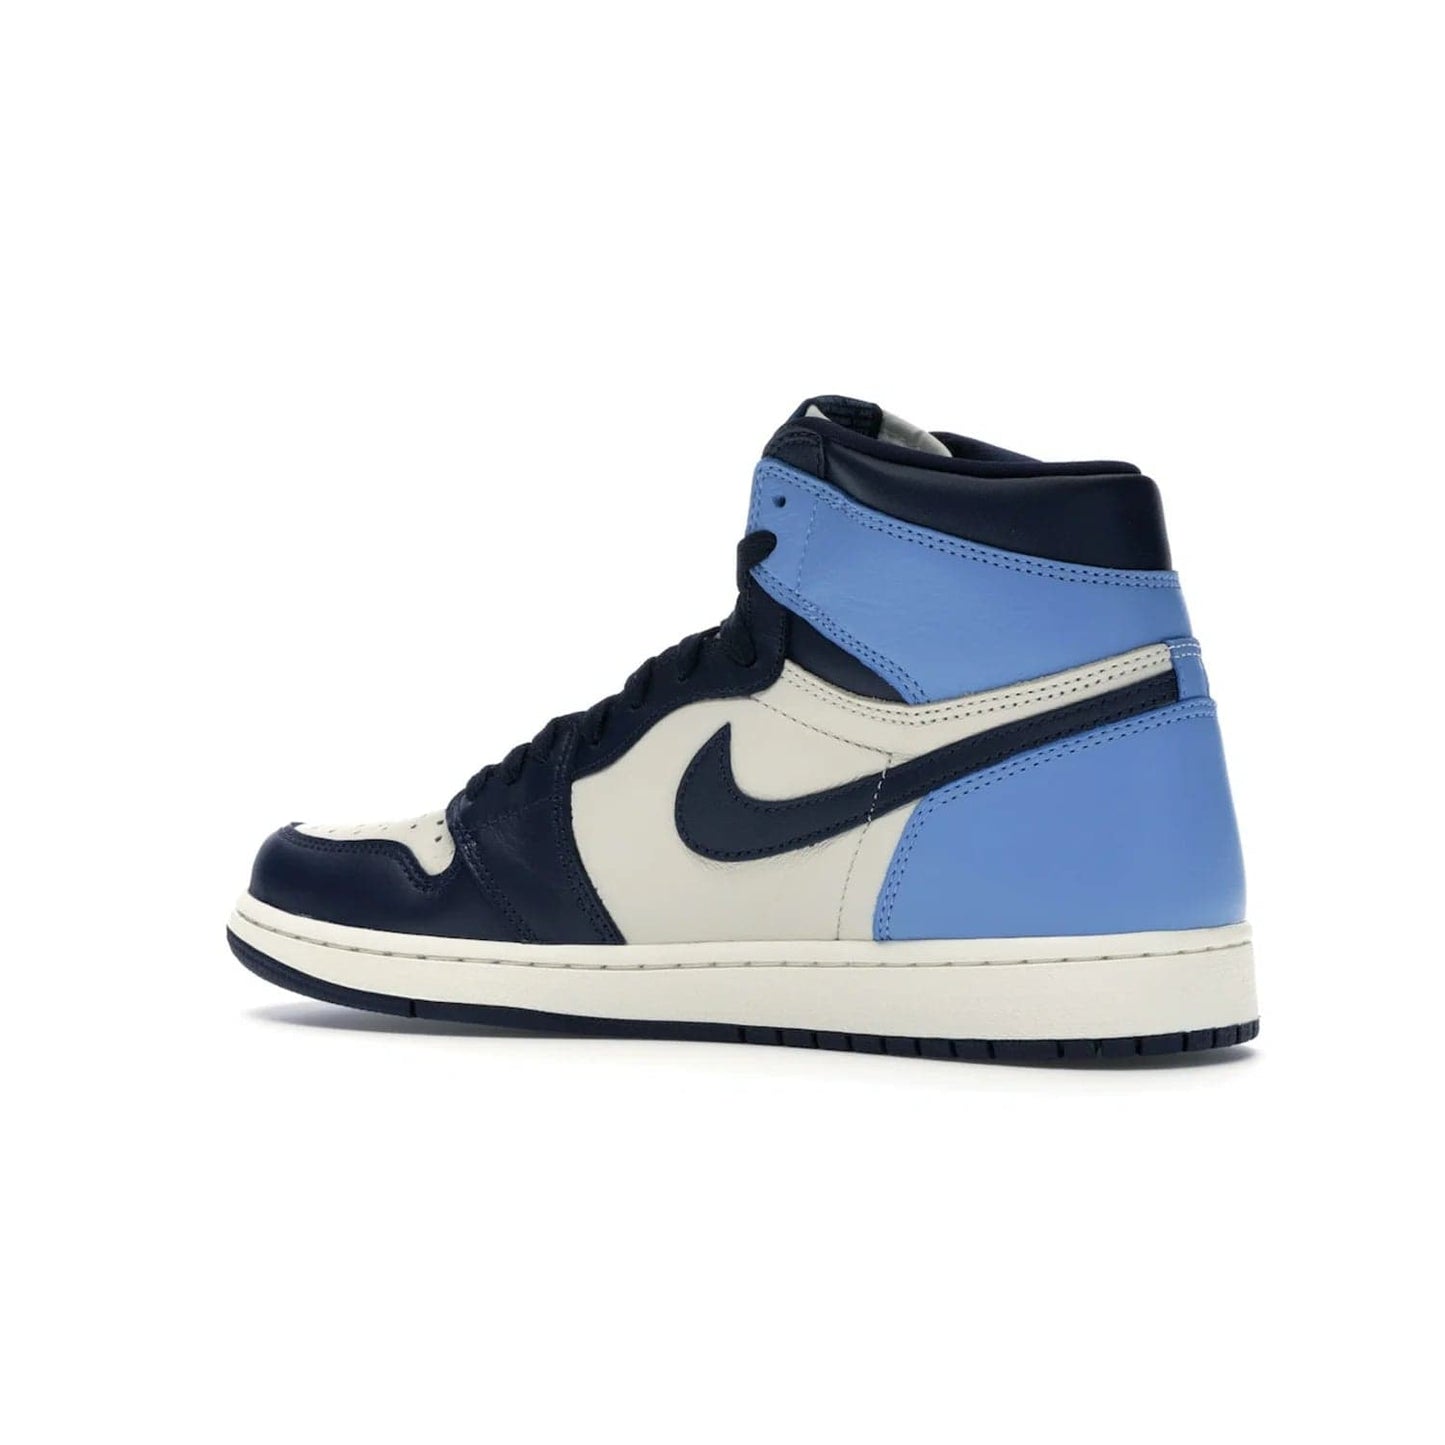 Jordan 1 Retro High Obsidian UNC - Image 22 - Only at www.BallersClubKickz.com - Bring a timeless classic to your wardrobe with the Air Jordan 1 Retro High "Obsidian/University Blue”. A full leather upper combines Obsidian and University Blue detailing for a retro Jordan style. Stitched Jumpman logo pays tribute to UNC. Experience classic style with a timeless sneaker.